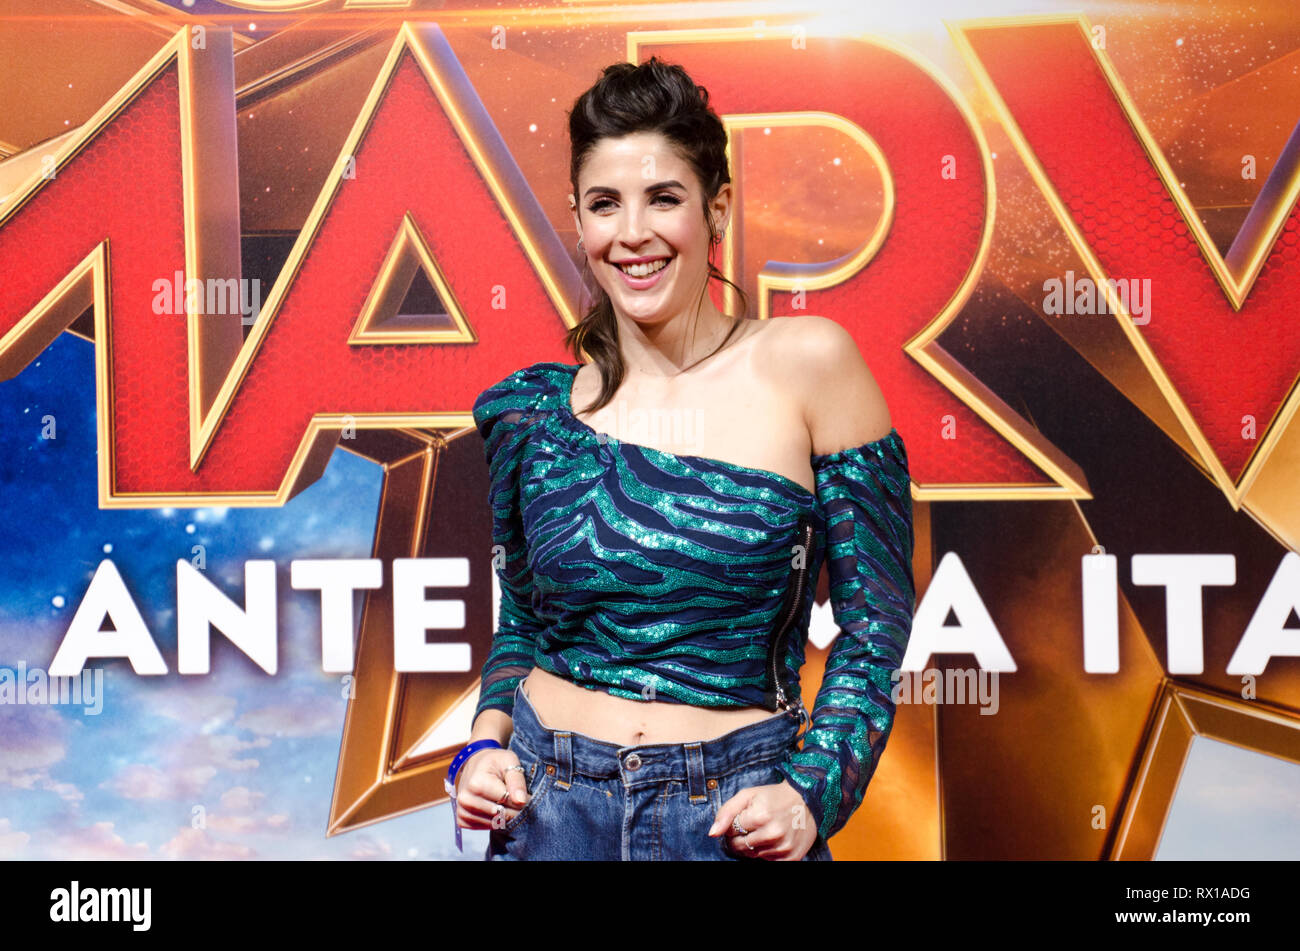 Milan, Italy. 19th July, 2023. Milan, Milano, Photocall preview of the film  “Barbie” - Martina Luchena Credit: Independent Photo Agency/Alamy Live News  Stock Photo - Alamy